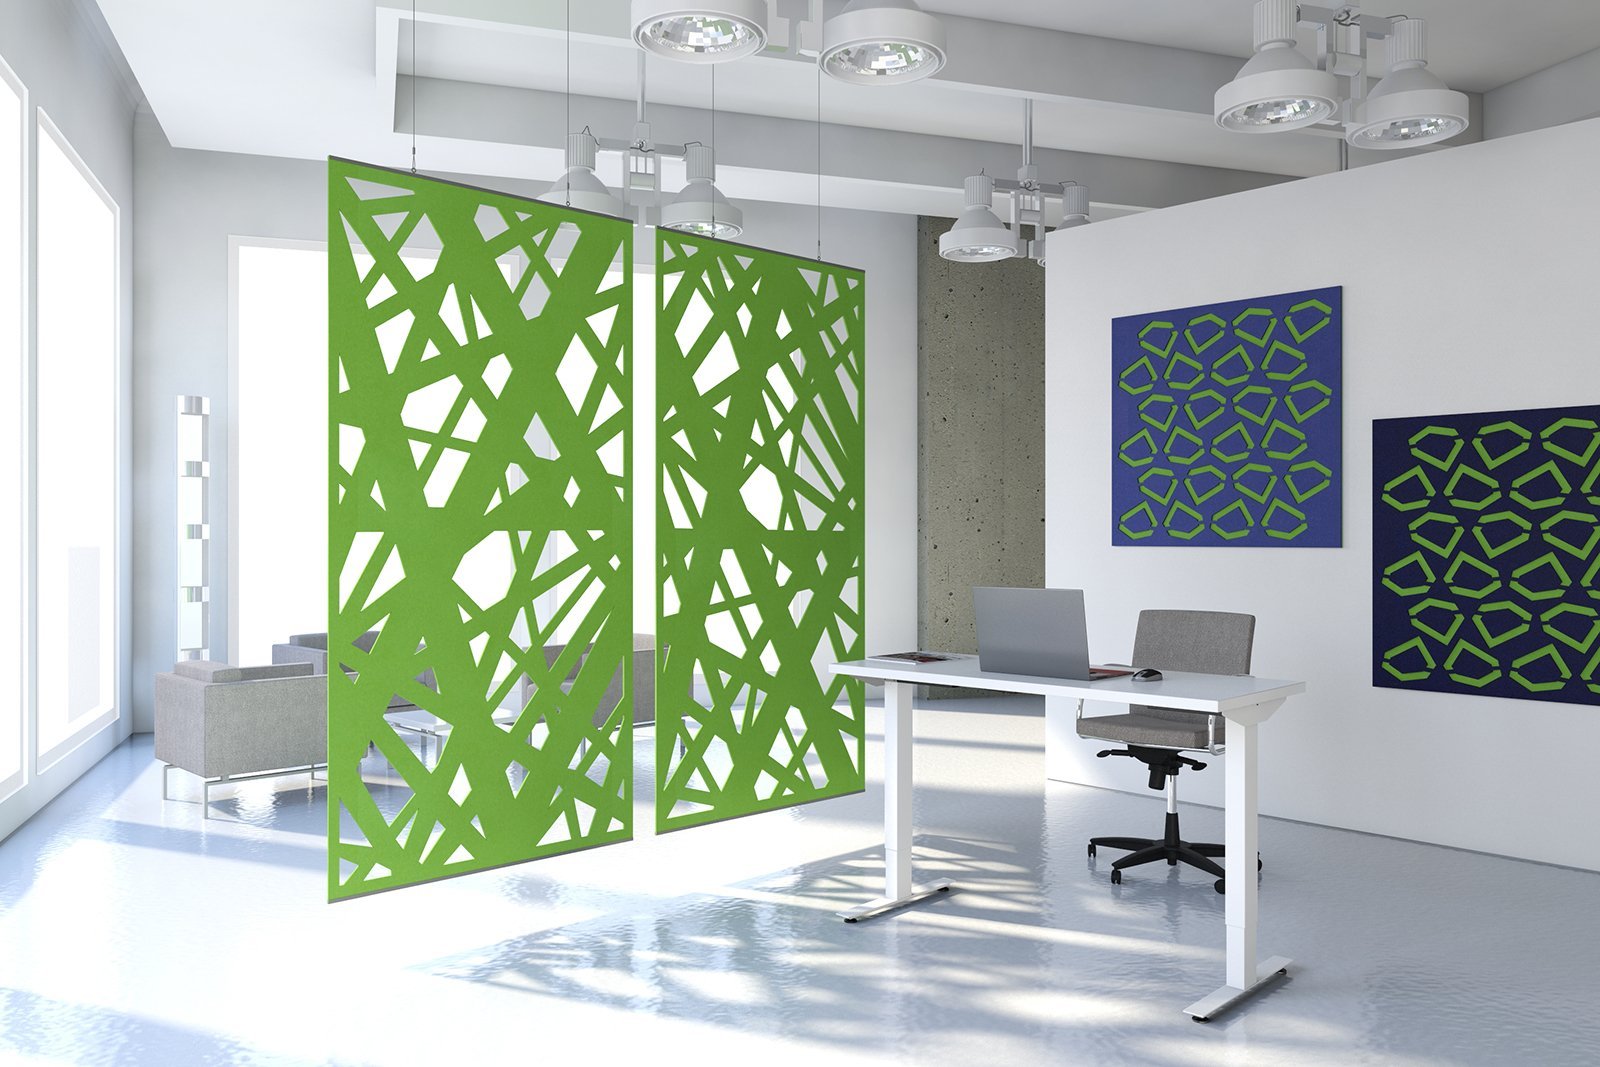 Echodeco 90% Sound Absorb Acoustic Panels and Partitions  47"w x 70"h